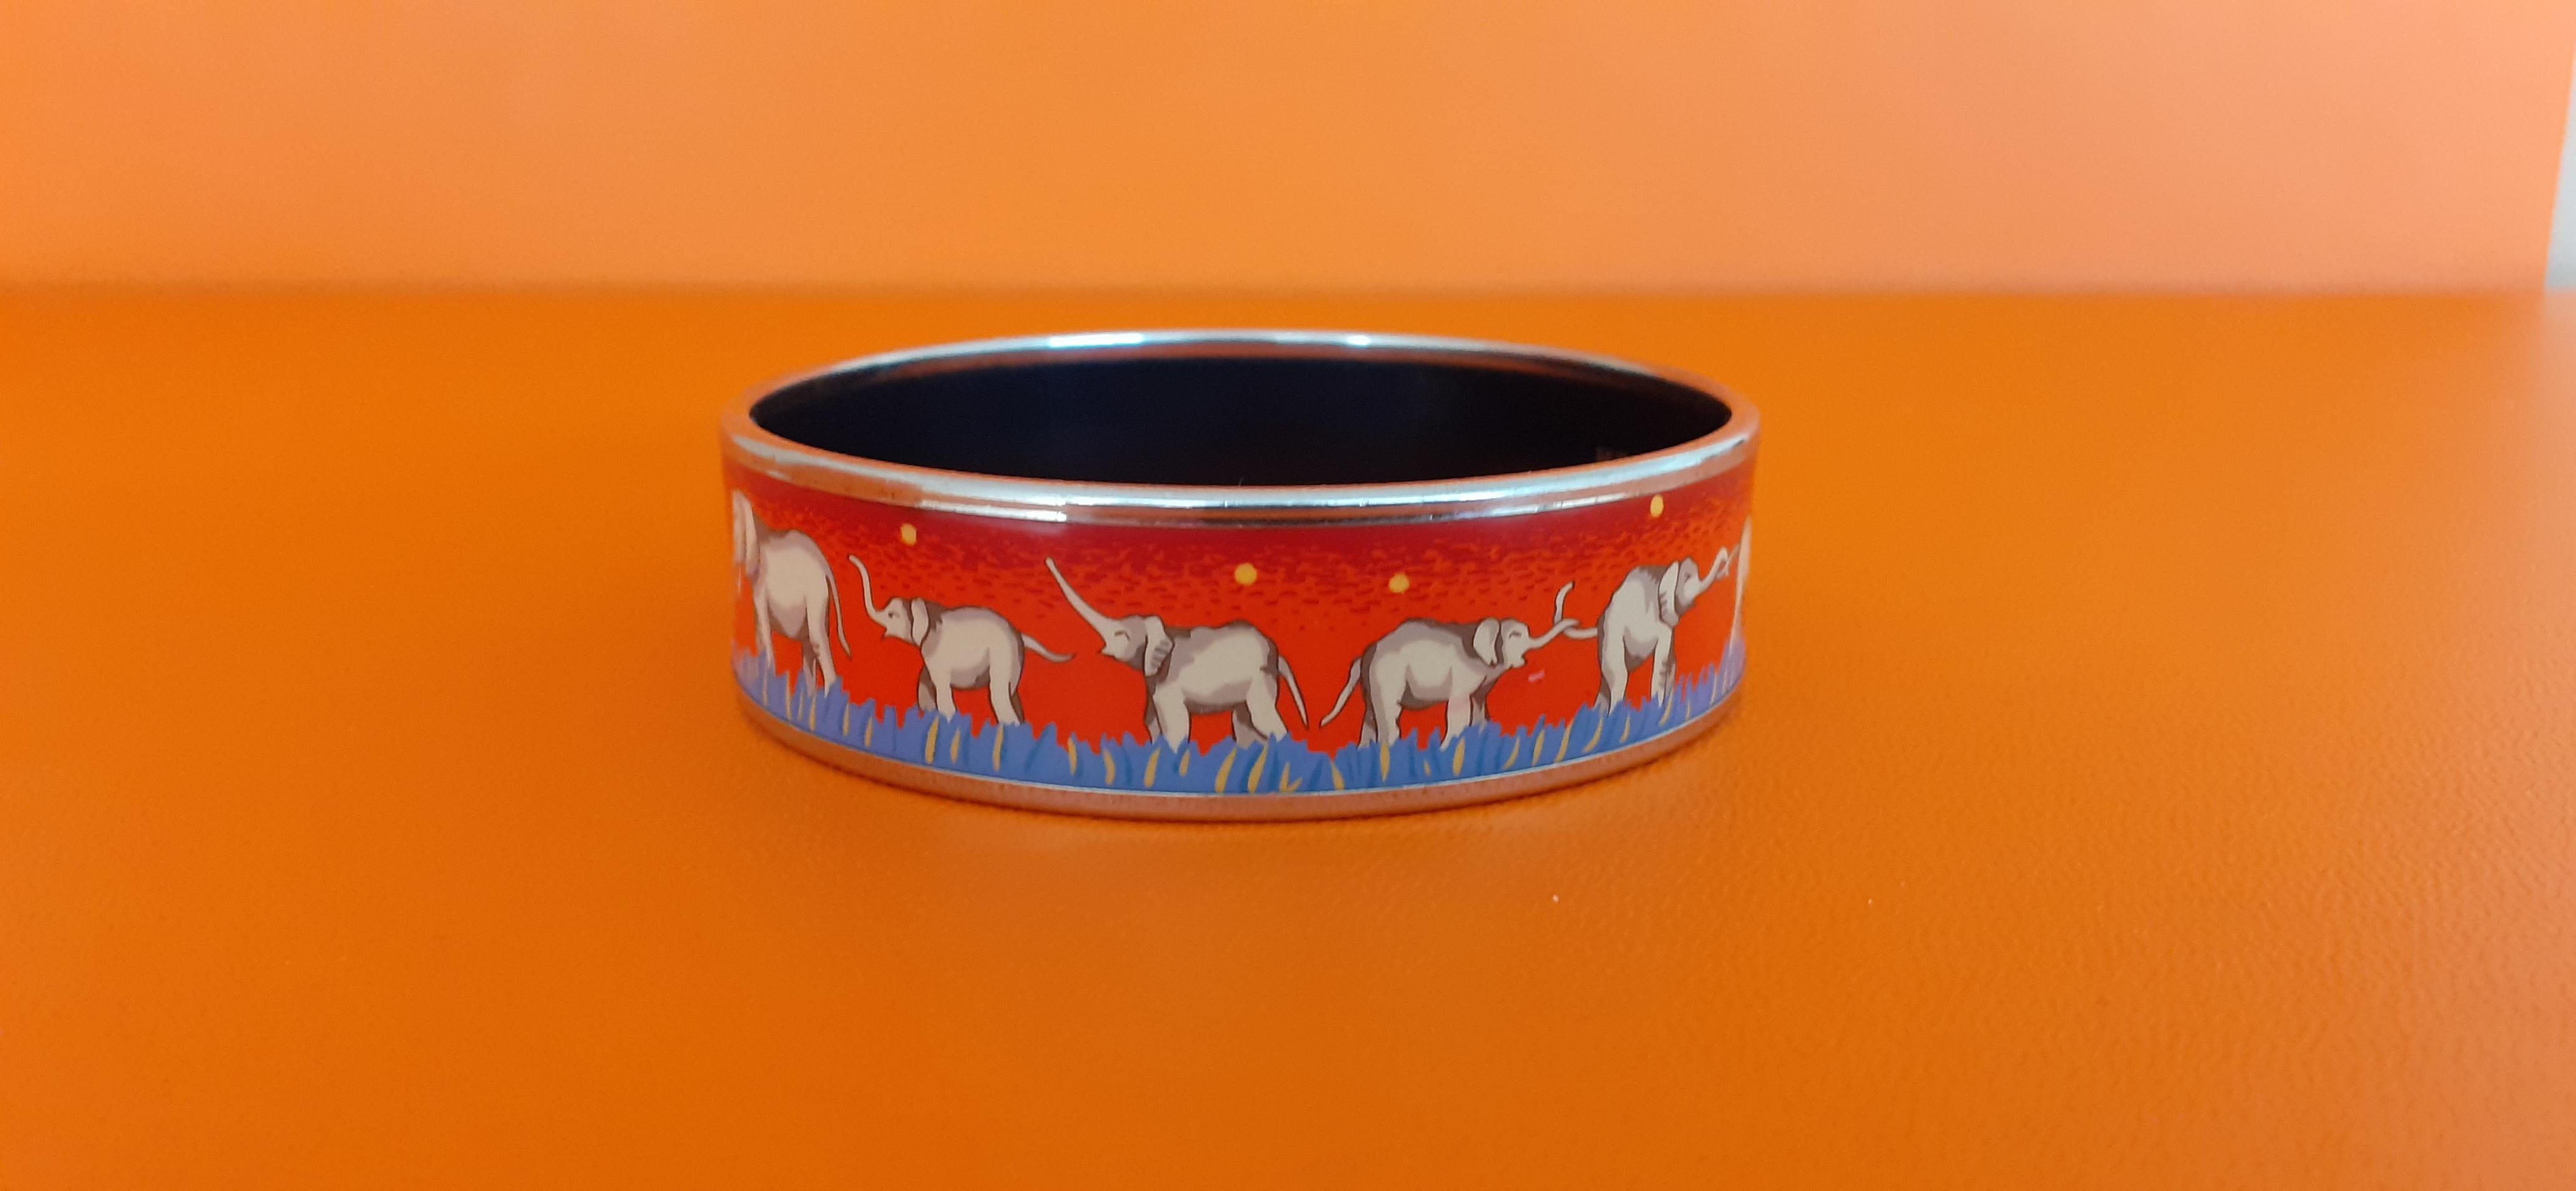 Beautiful and Rare Authentic Hermès Bracelet

Print: Elephants Grazing

Pattern: Elephants, Africa, Wild Animals

Hard to find ! One of the most thought after Hermès Bracelet

Made in Austria + F

Vintage bracelet from 2002

Made of printed enamel